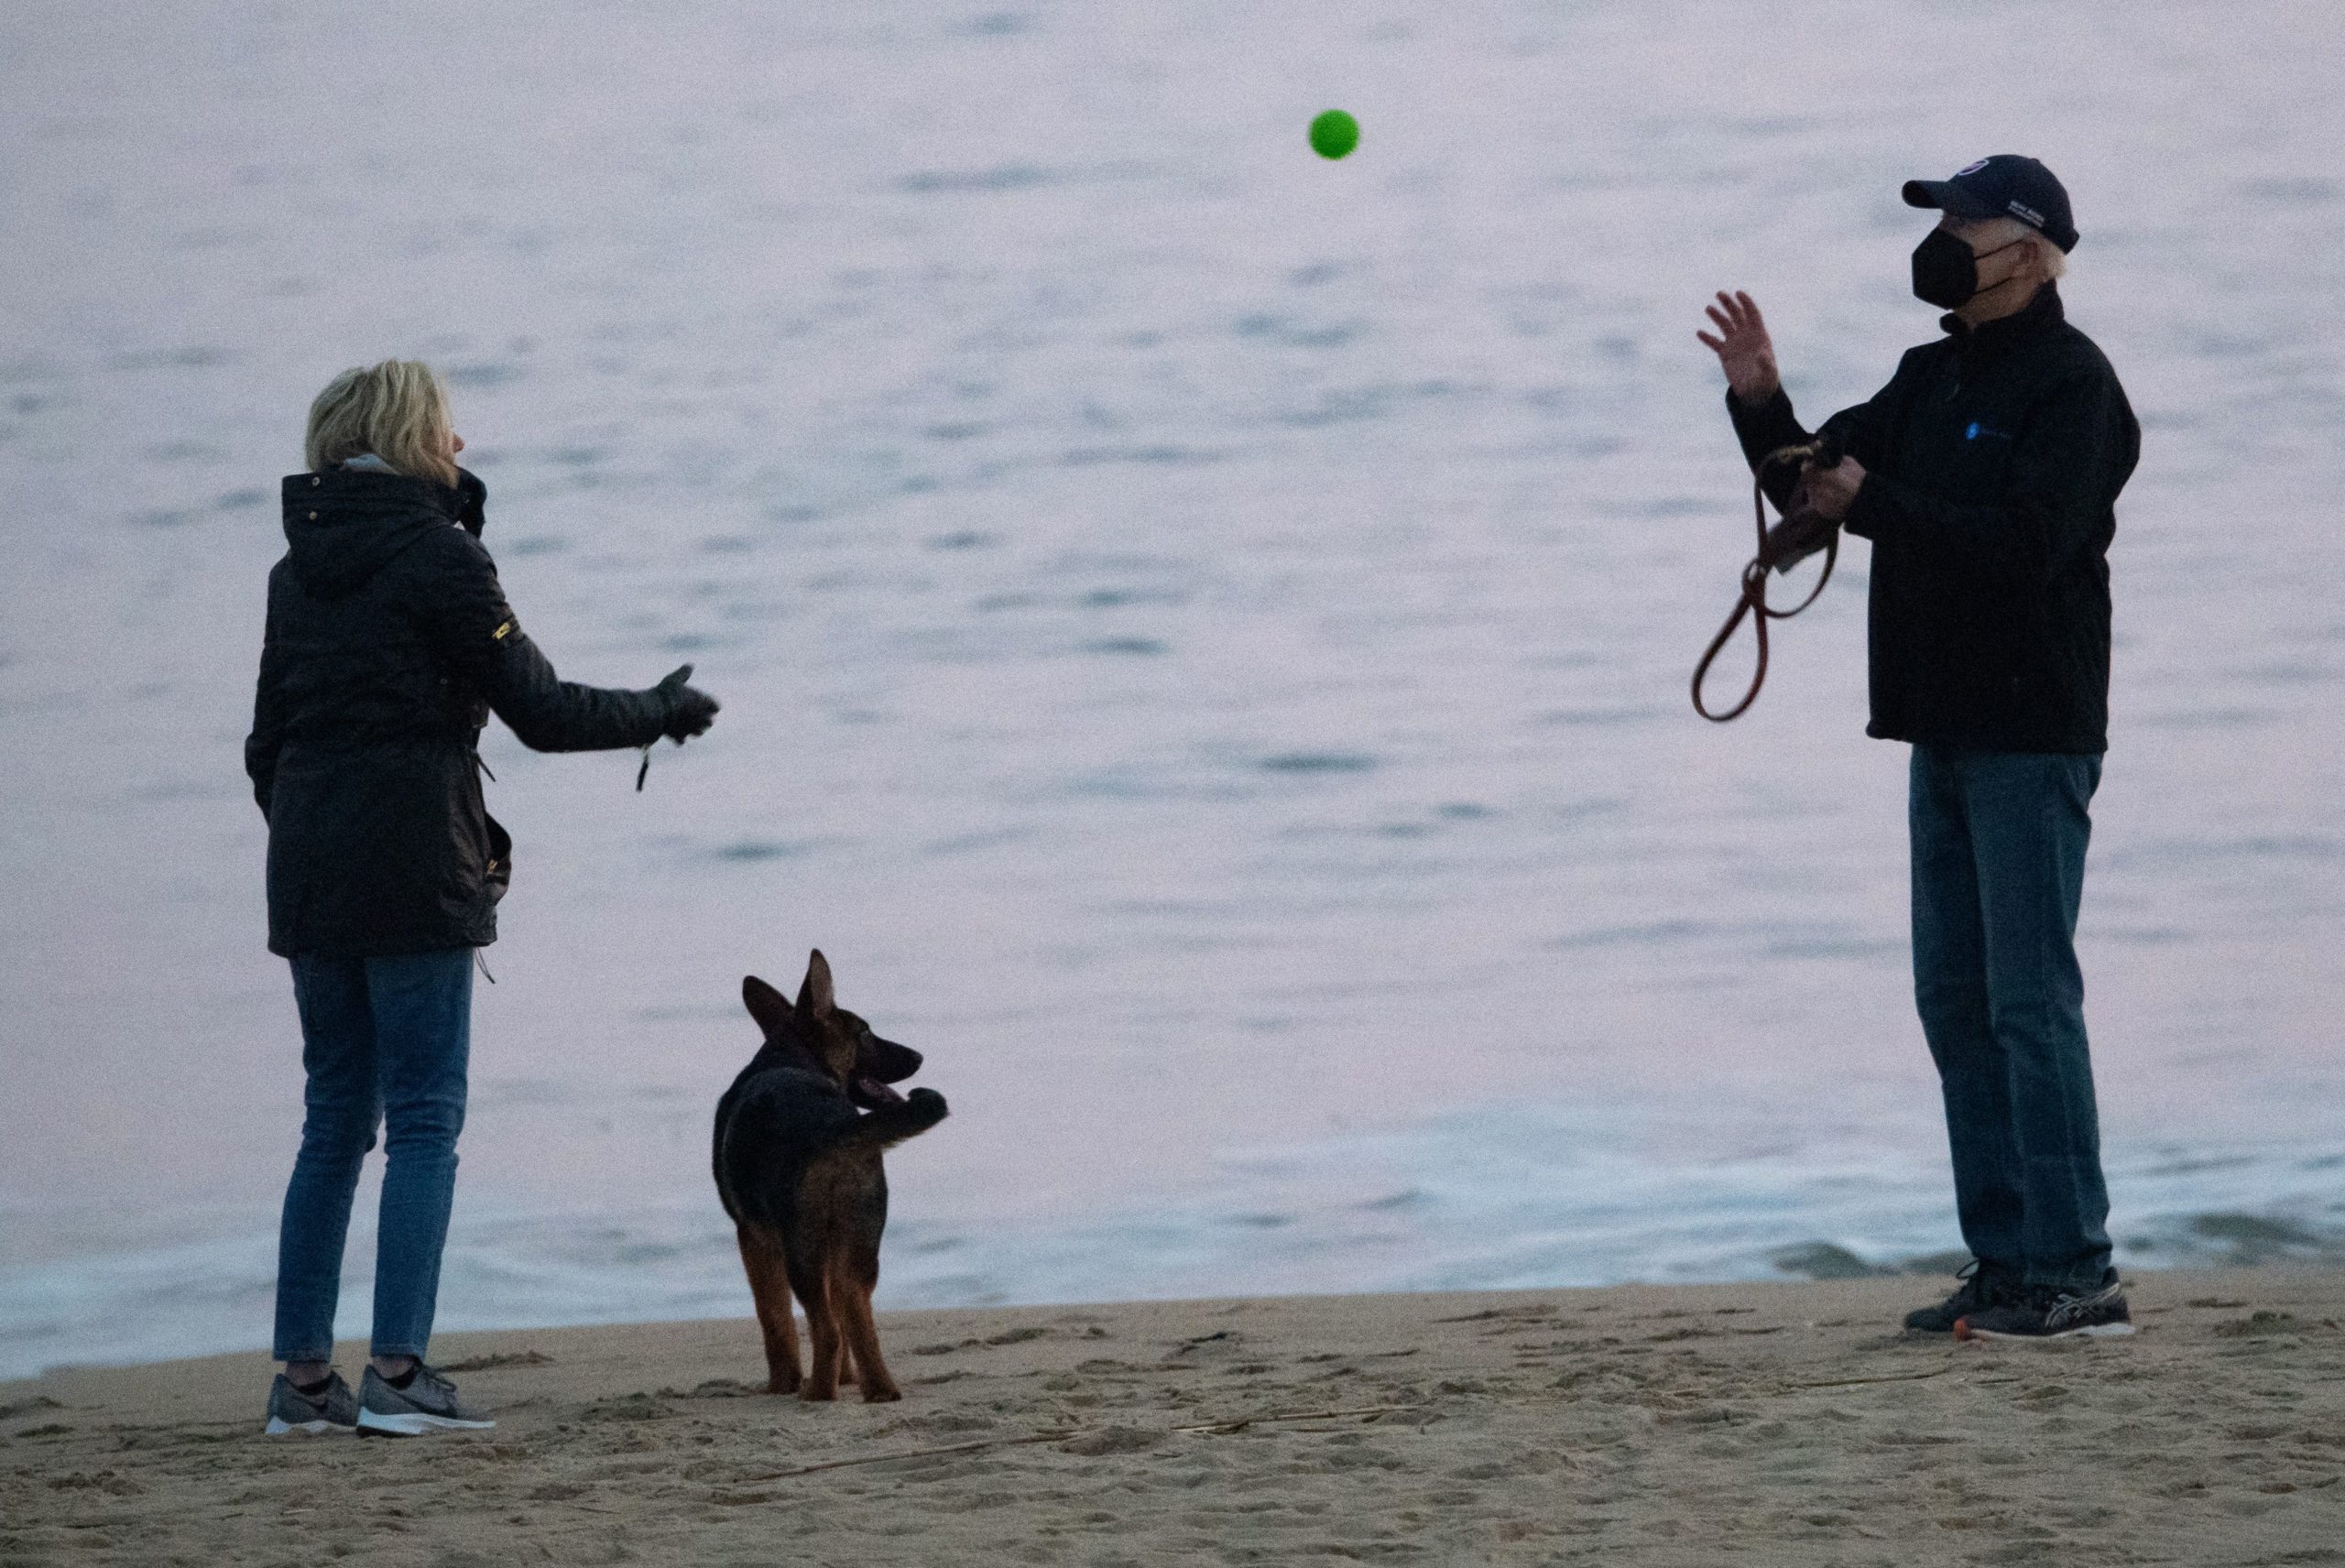 TOPSHOT - US President Joe Biden and US First Lady Jill Biden, play with their new dog Commander at Rehoboth Beach, Delaware, on December 28, 2021. (Photo by SAUL LOEB / AFP) (Photo by SAUL LOEB/AFP via Getty Images)